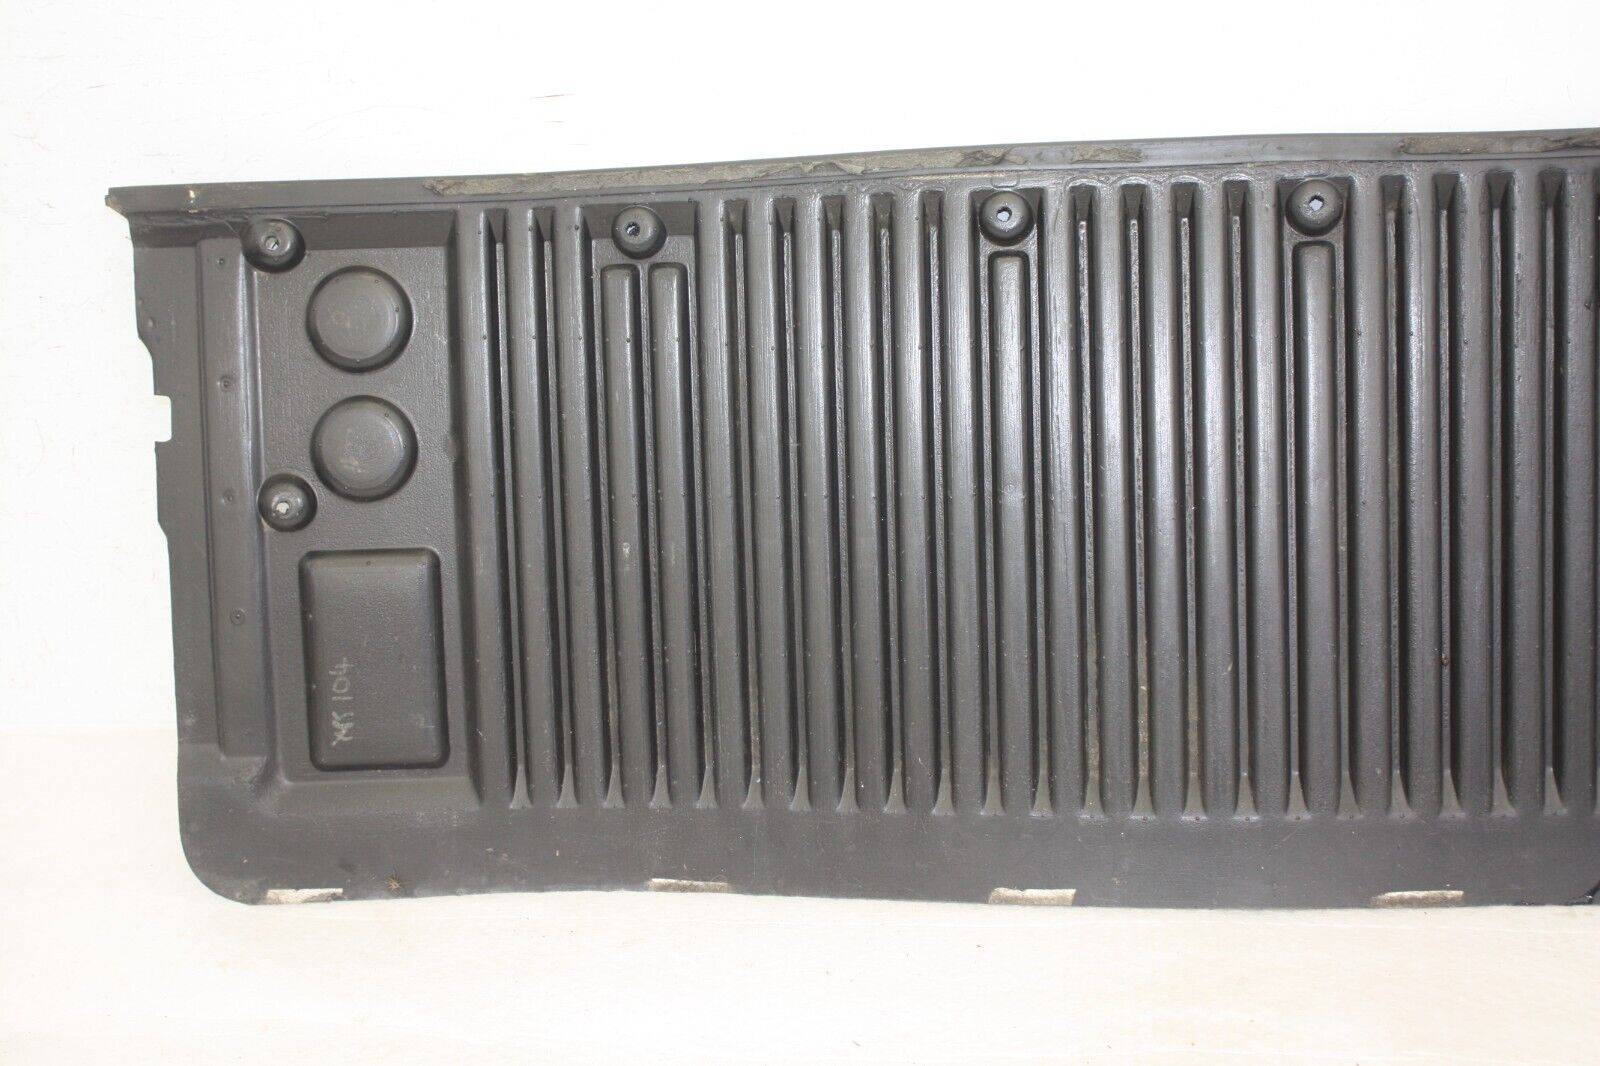 Ford-Ranger-Tailgate-Liner-Protector-Cover-AB39-2140726-Genuine-176321614493-3